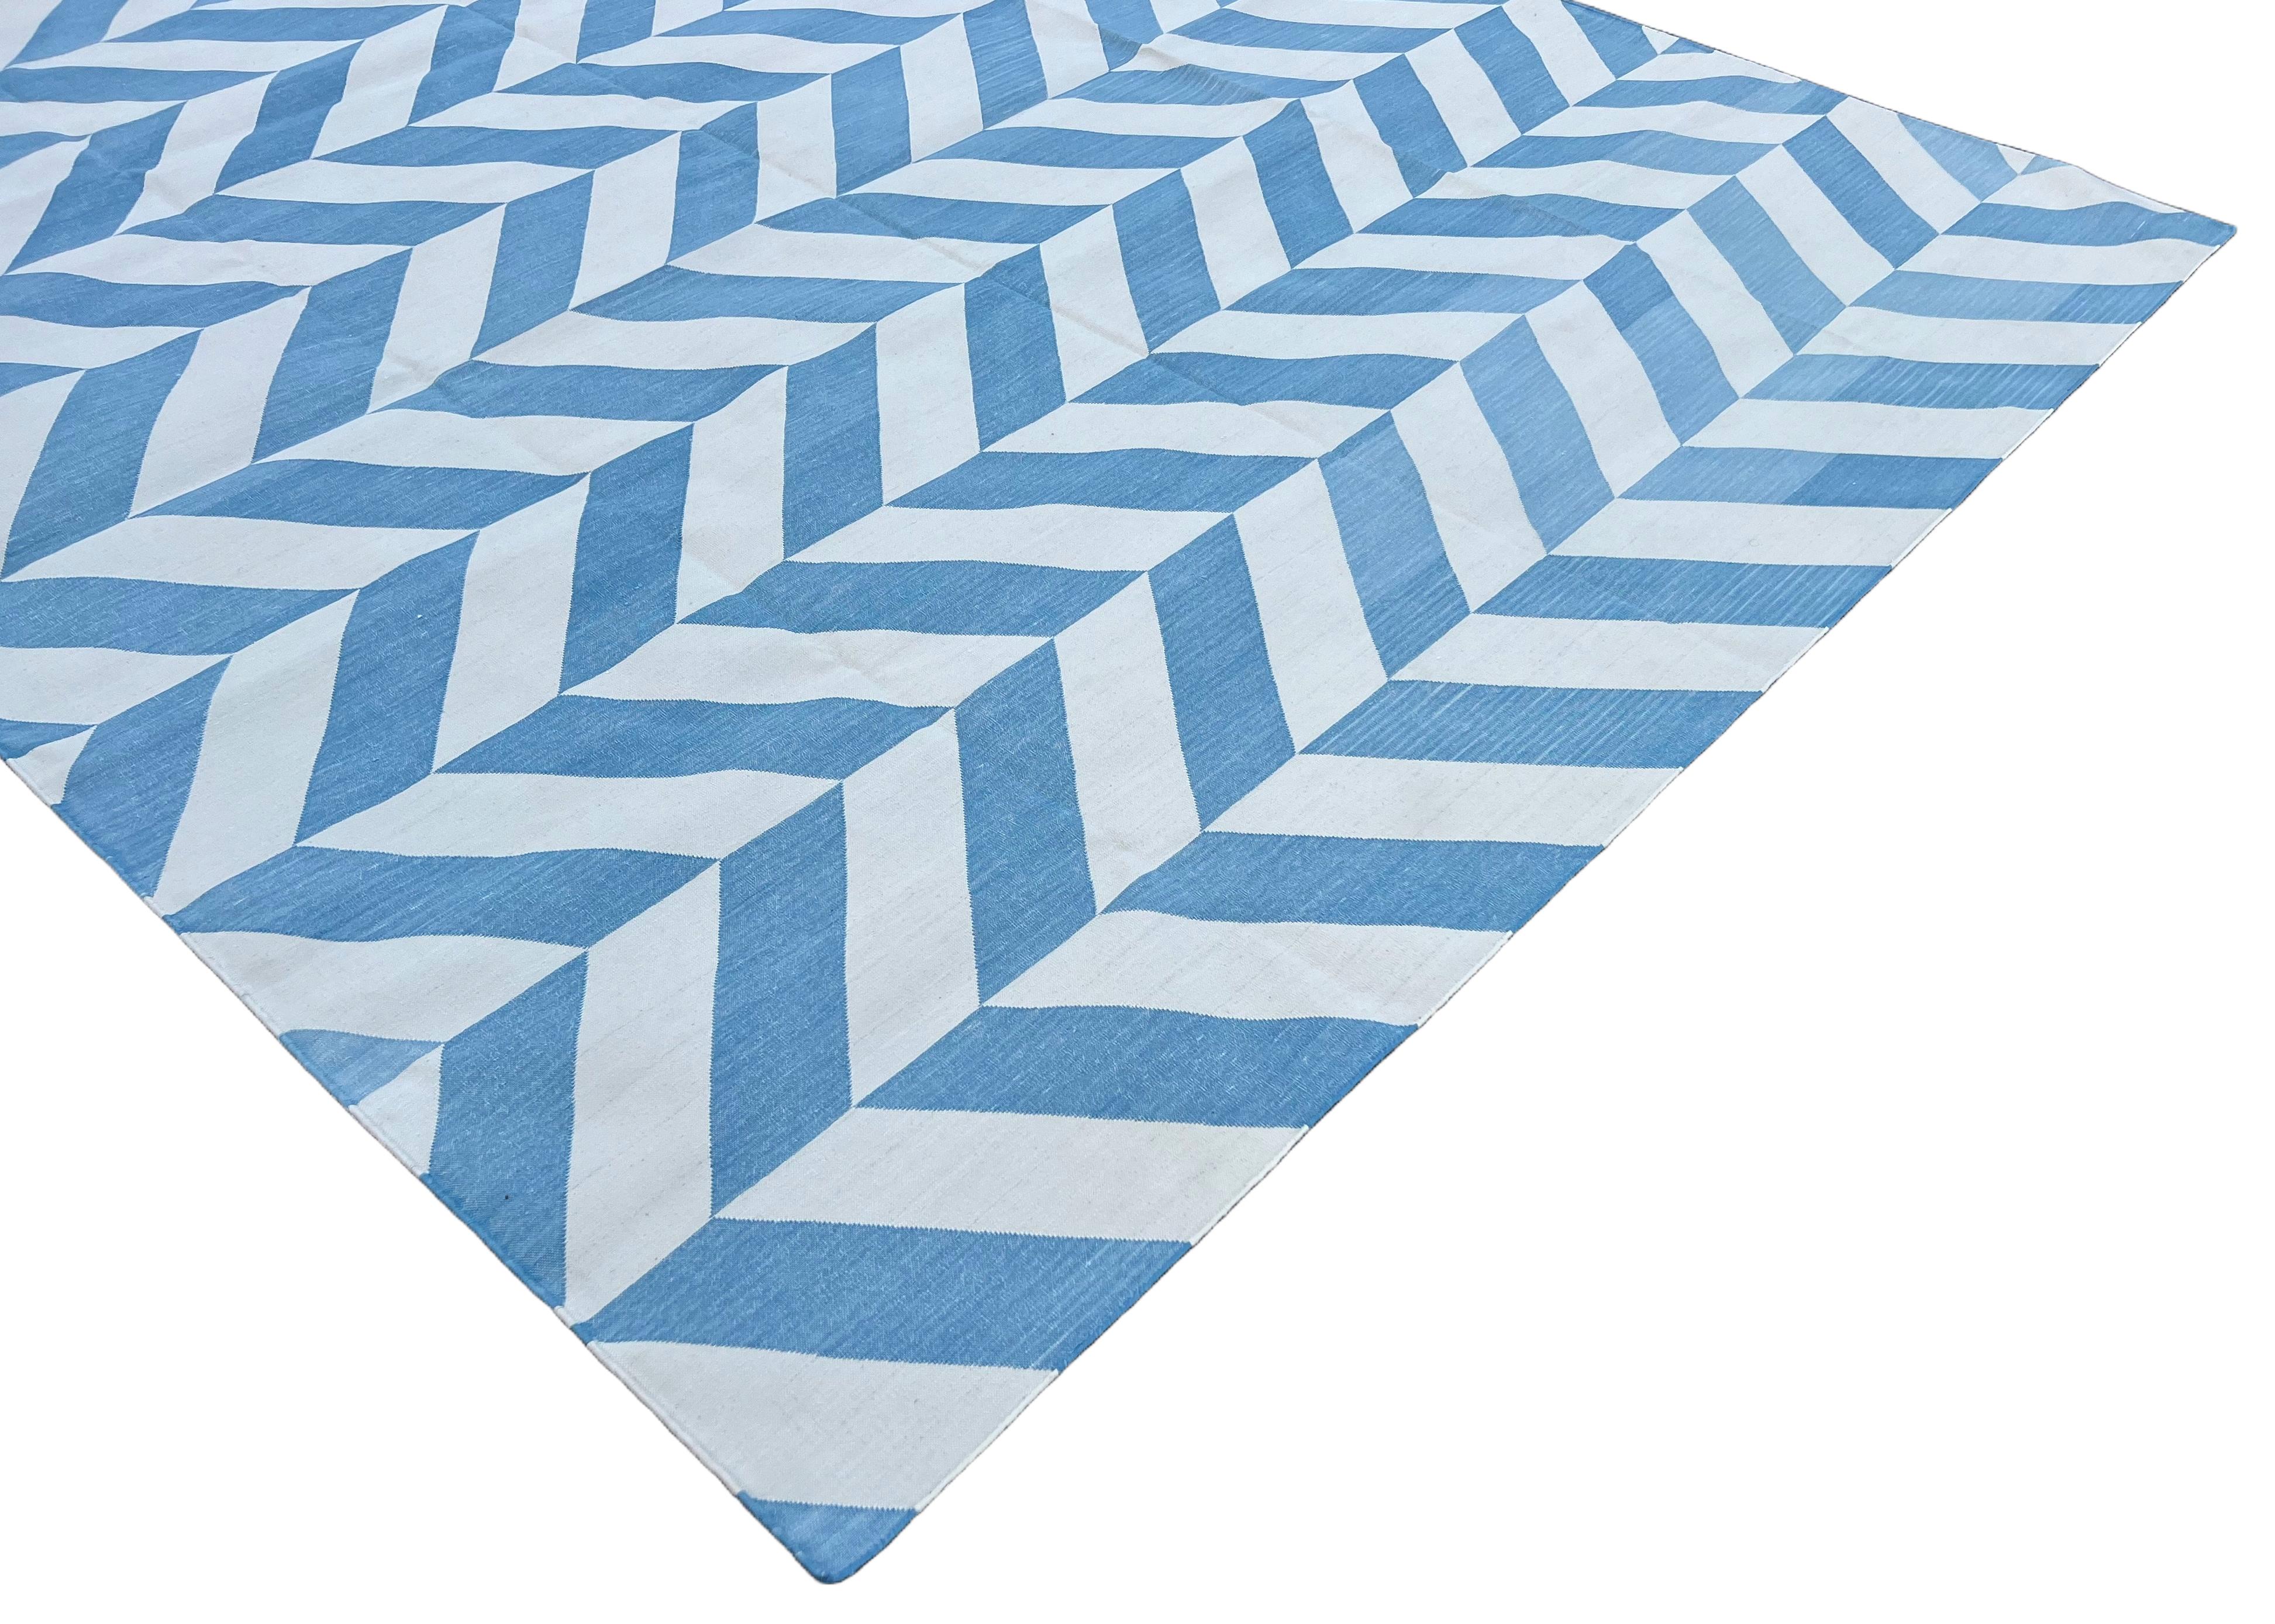 Contemporary Handmade Cotton Area Flat Weave Rug, Sky Blue And White Zig Zag Striped Dhurrie For Sale